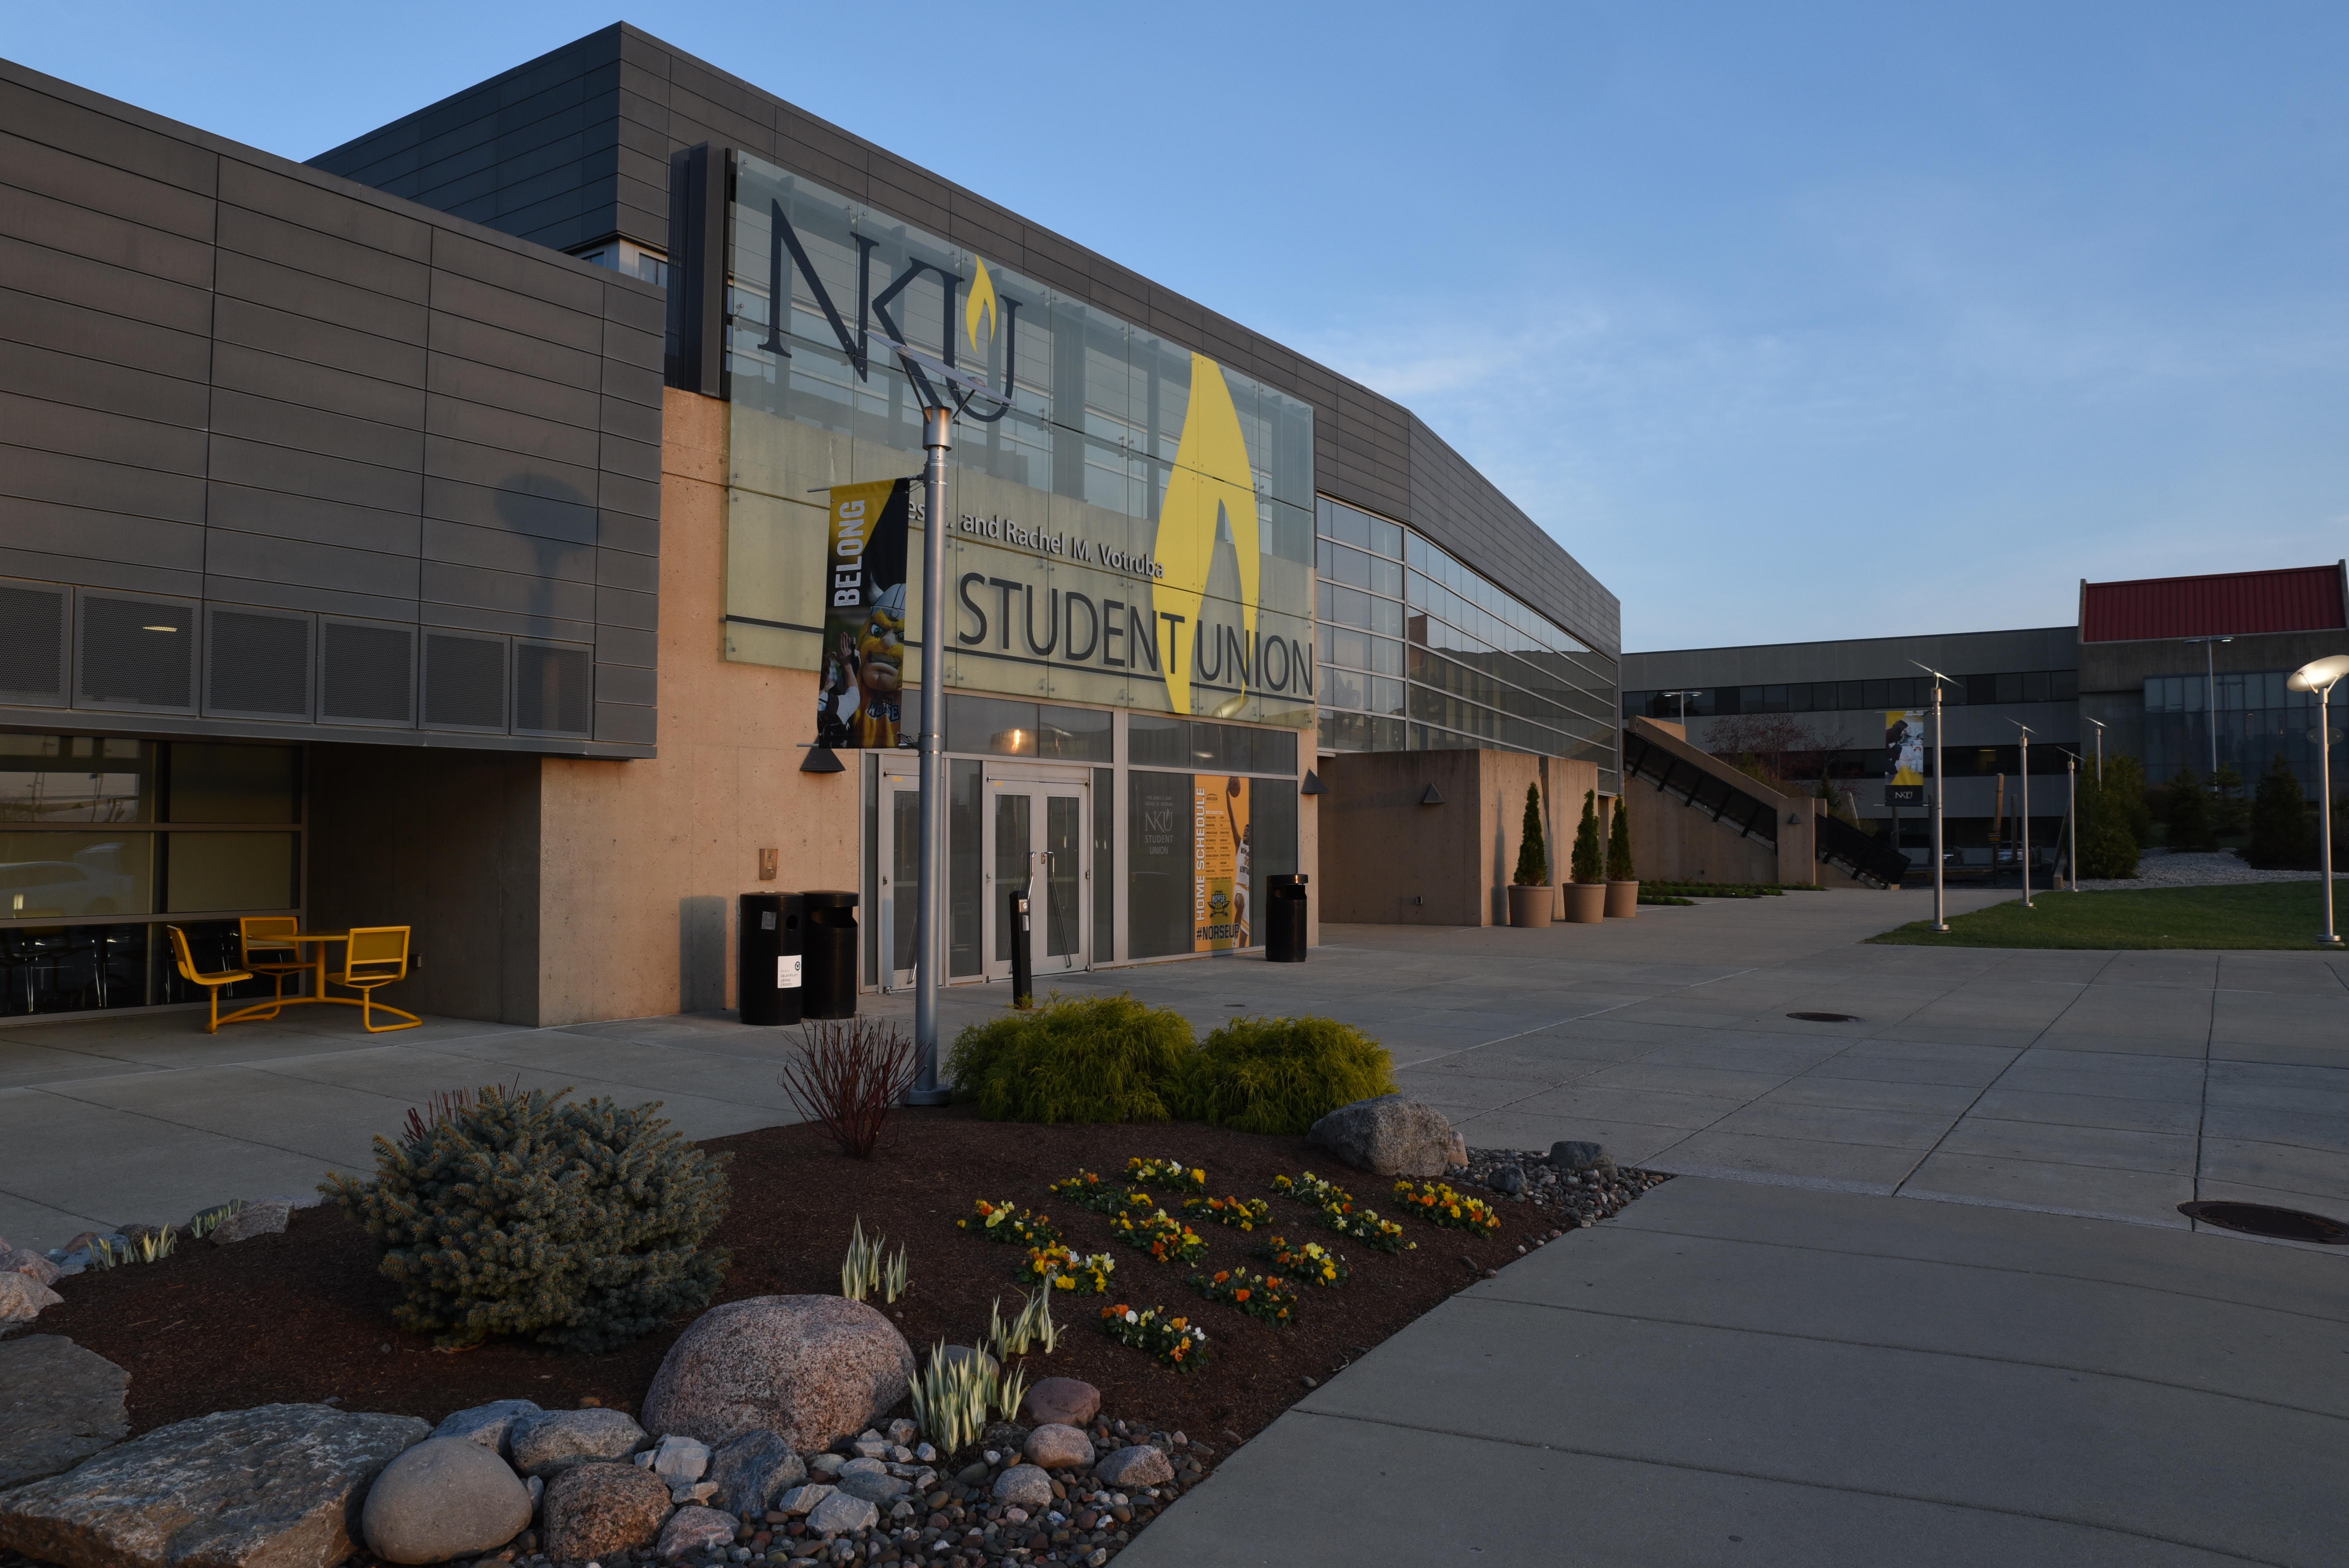 Nku 2022 Calendar Nku Spring Classes Delayed By One Week Due To Covid-19 Concerns